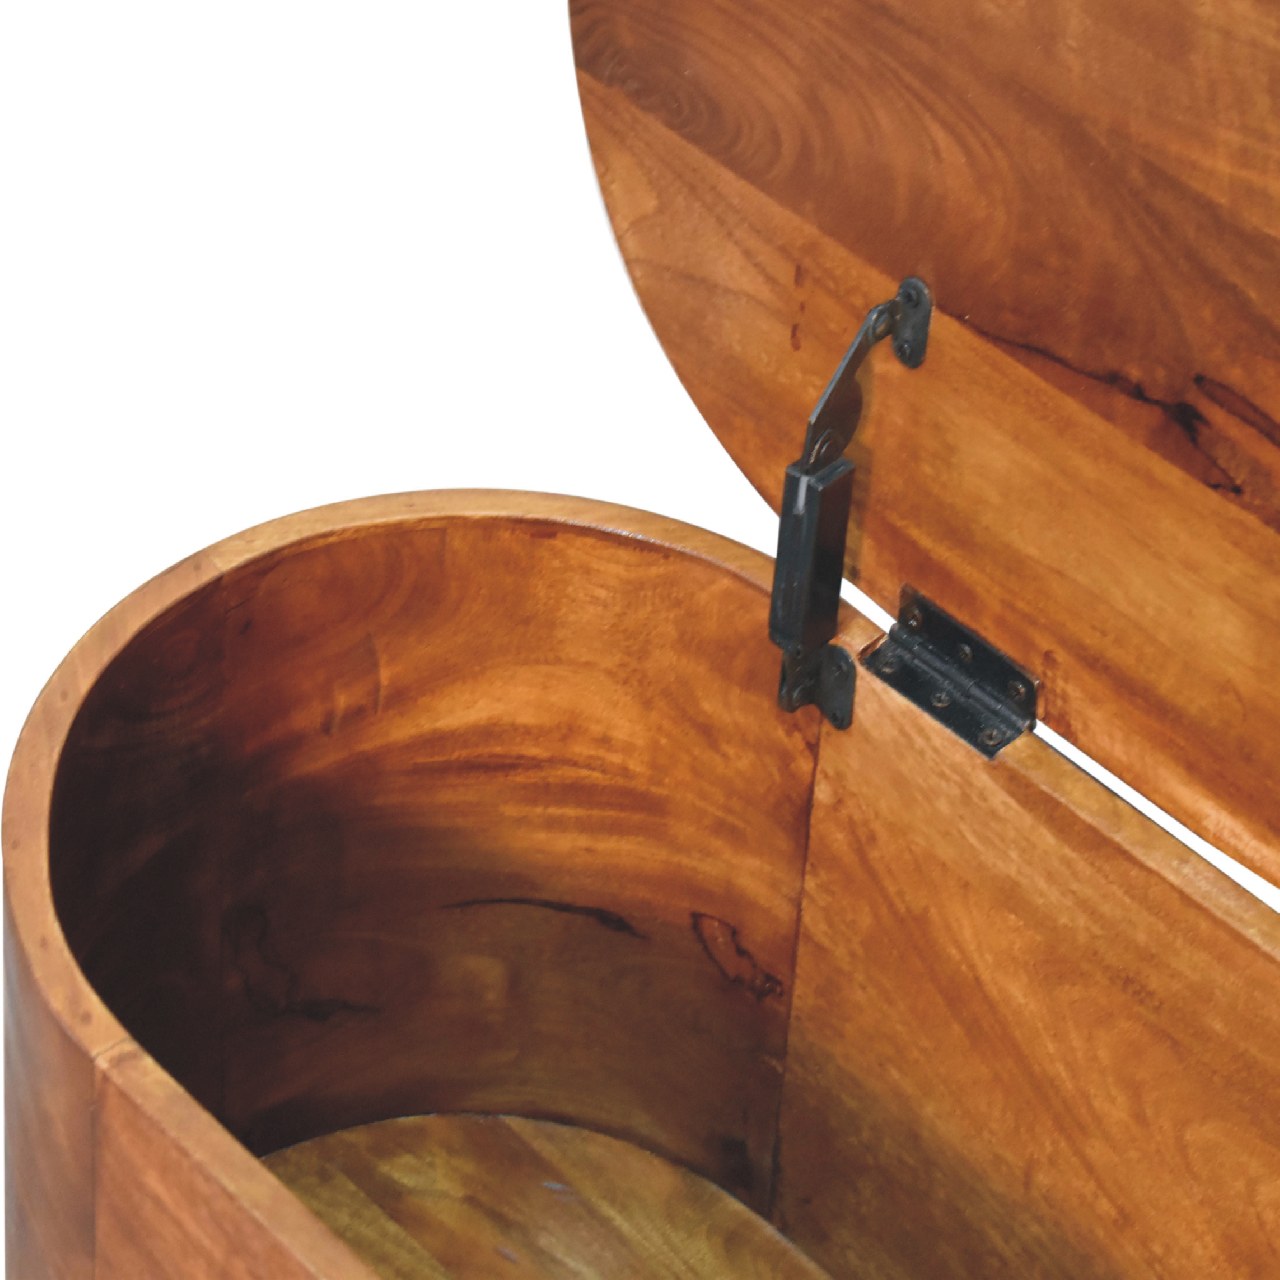 Chestnut Lid Up Rounded Storage Trunk Solid Wood